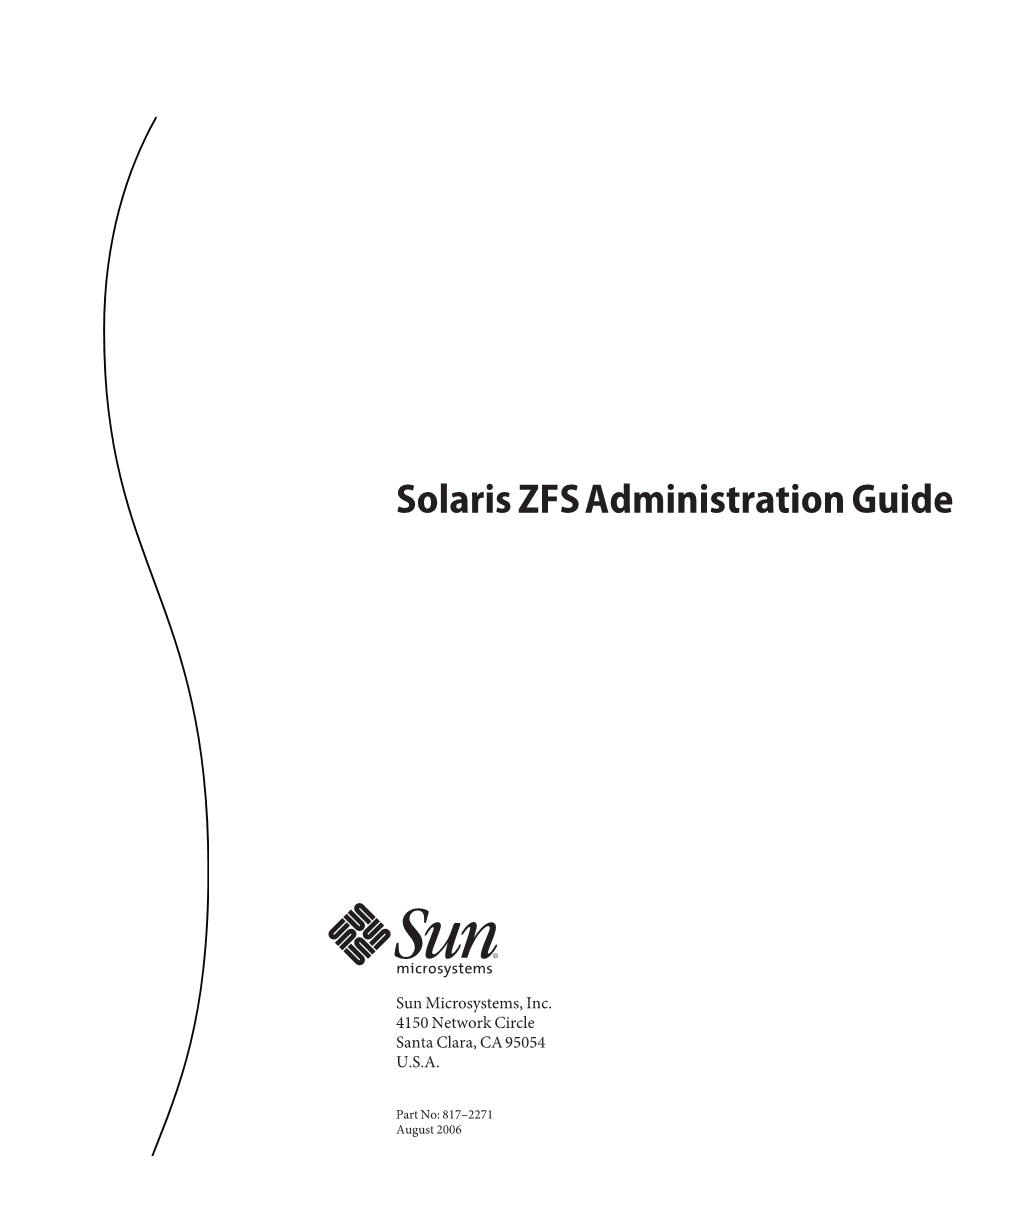 Solaris ZFS Administration Guide Provides Information About Setting up and Managing Solaristm ZFS ﬁle Systems